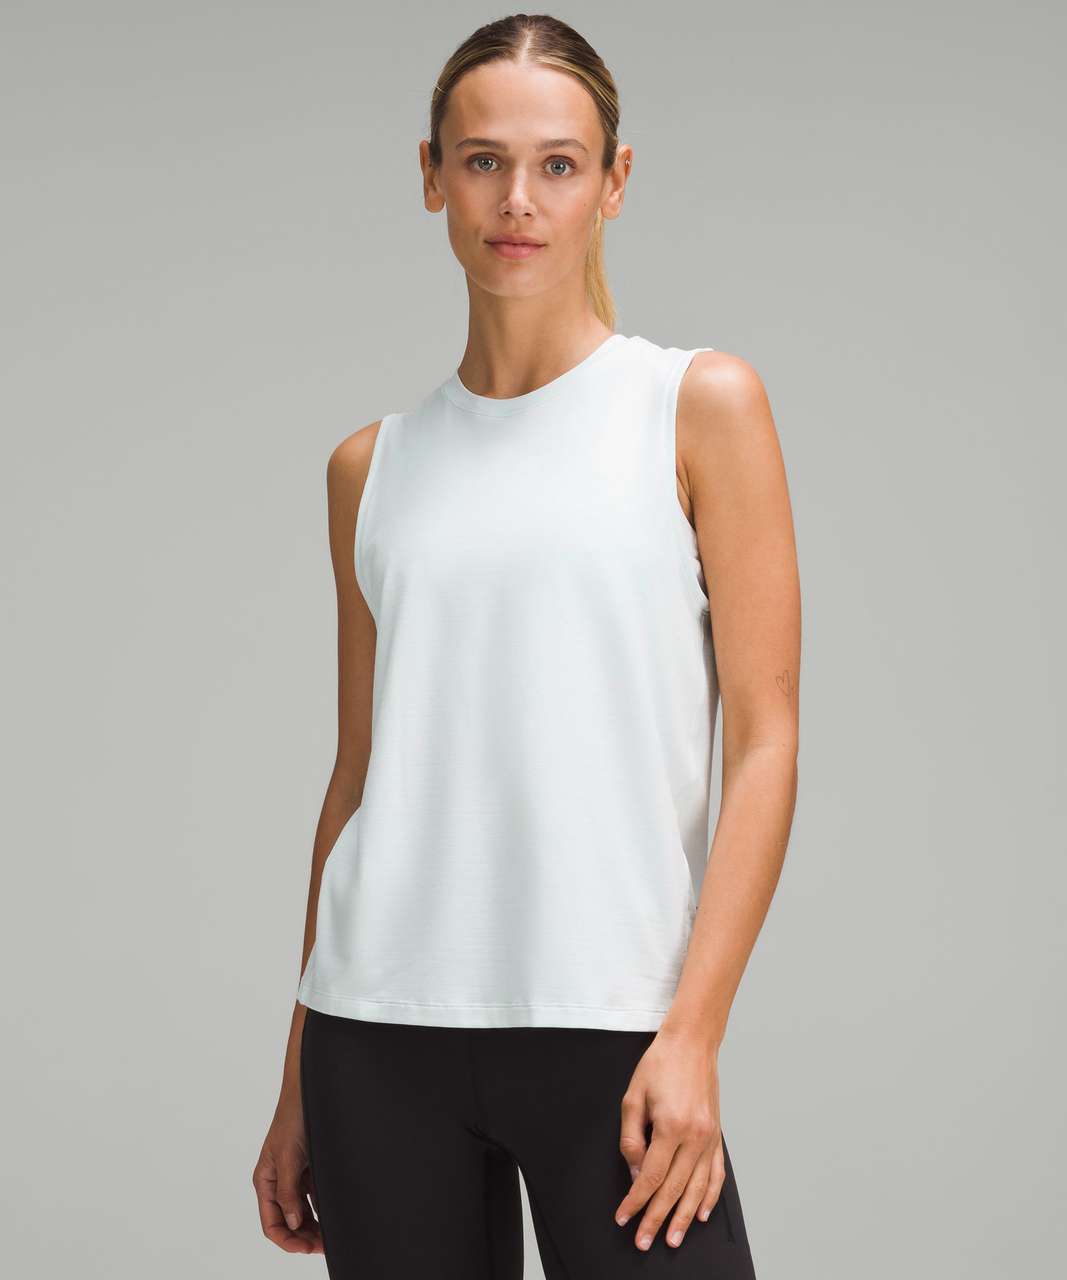 Lululemon License to Train Classic-Fit Tank Top - Heathered Sheer Blue